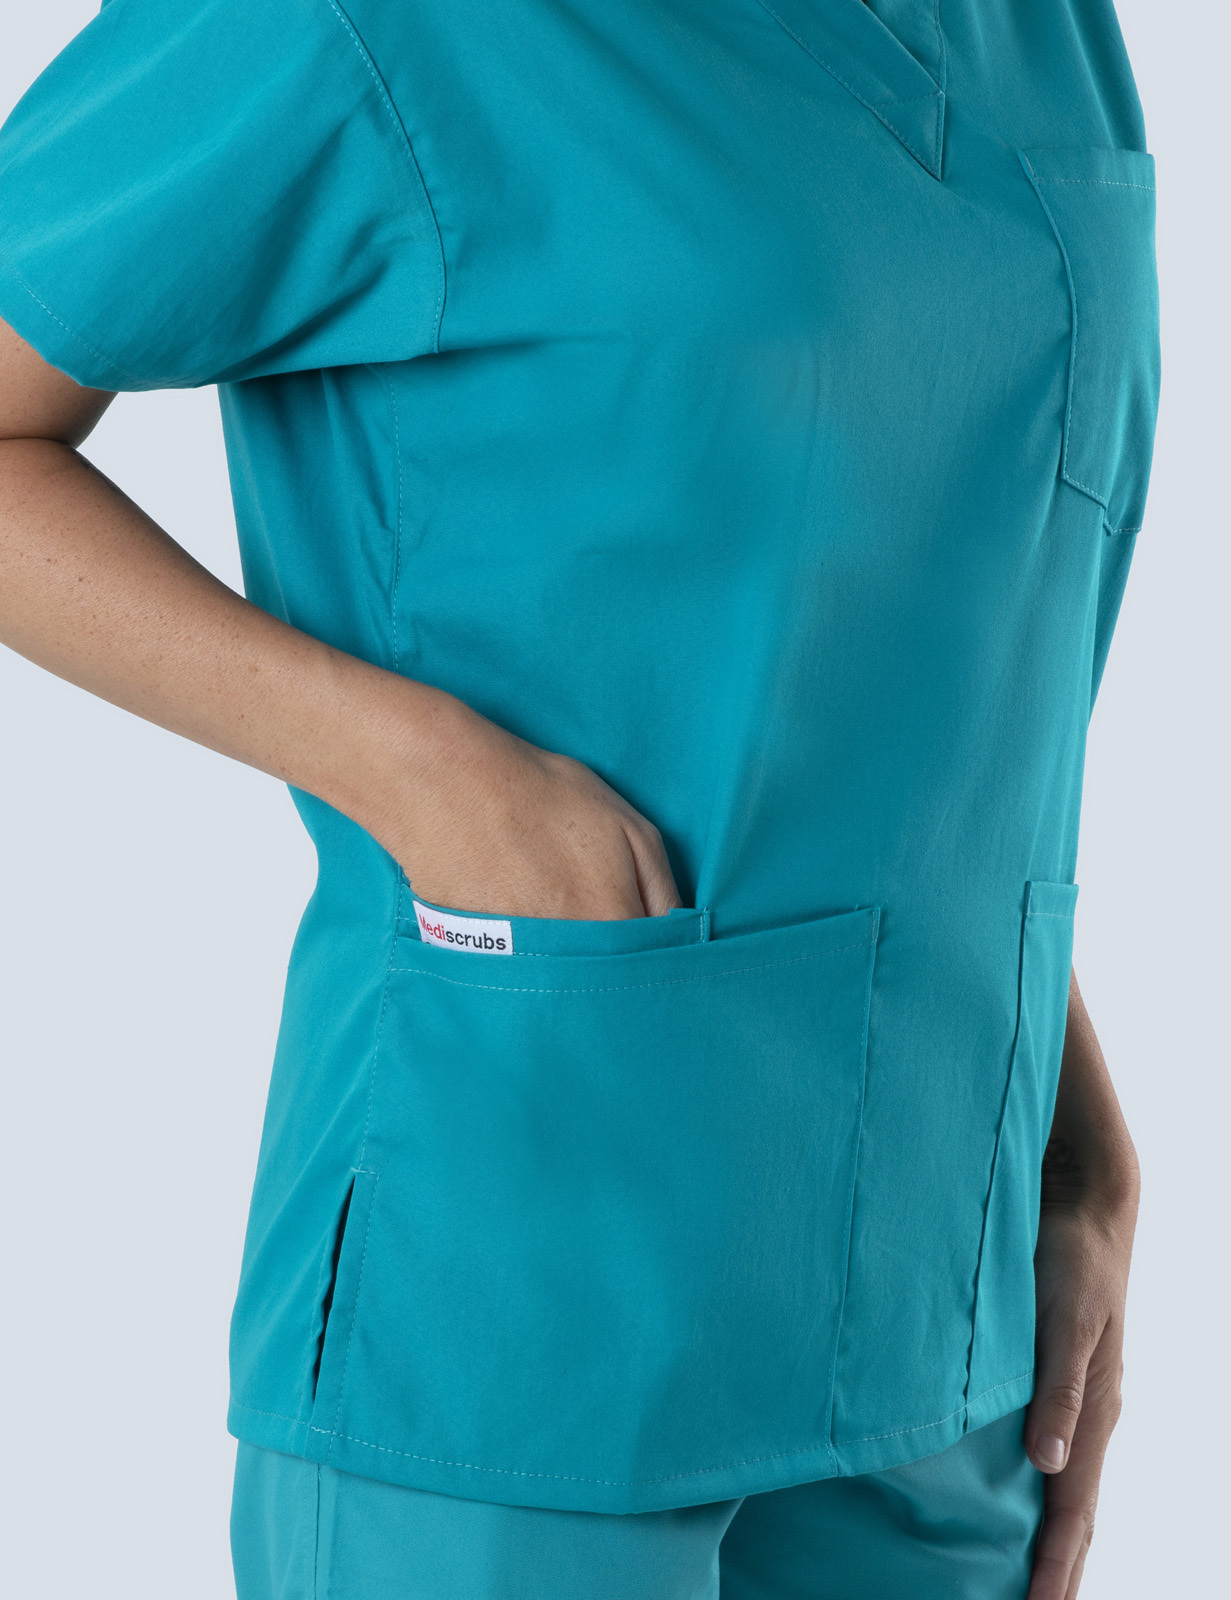 Gold Coast University Hospital - Children's Services RN (4 Pocket Scrub Top and Cargo Pants in Teal incl Logos)